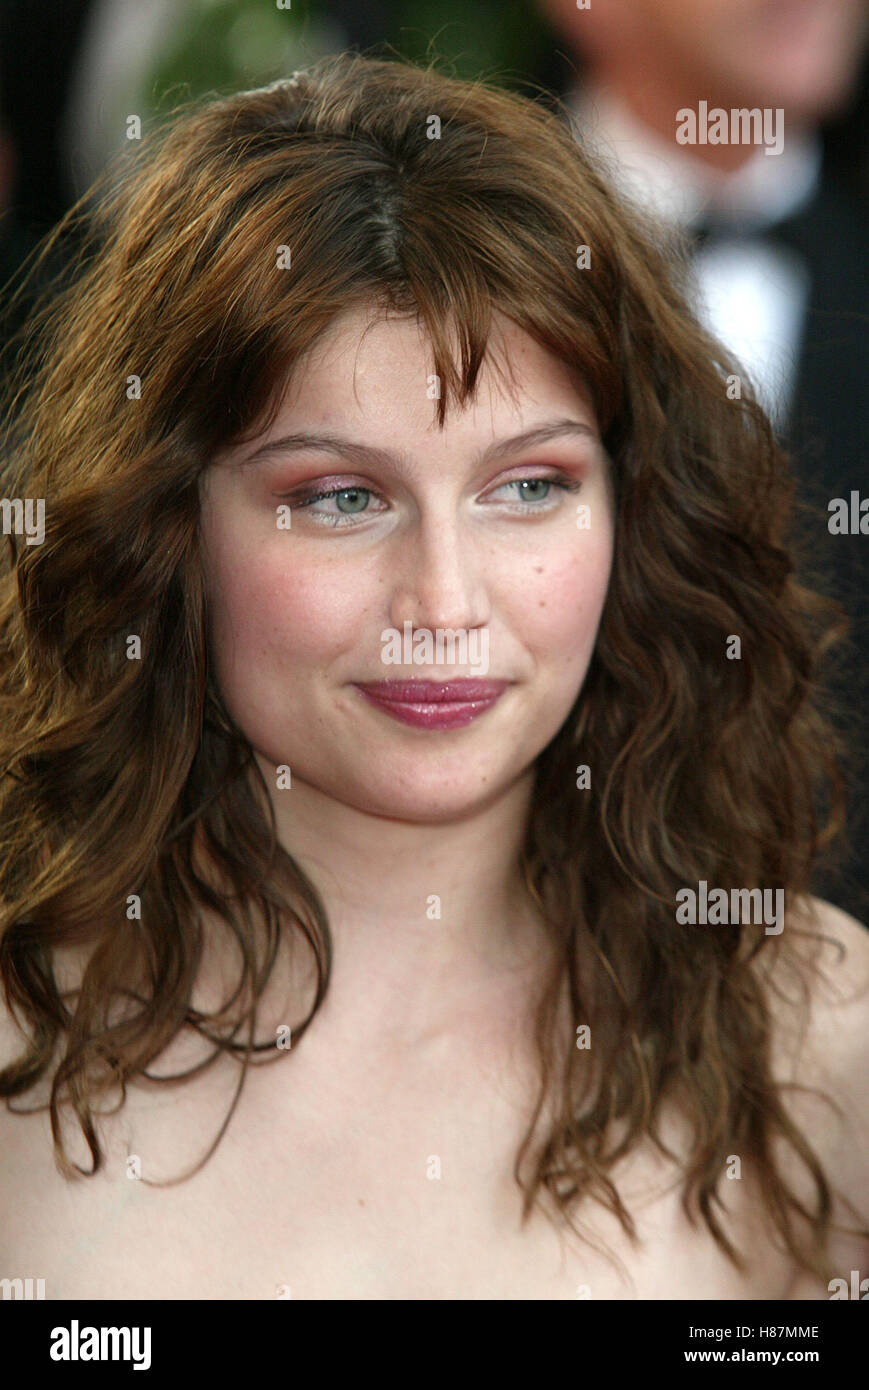 LAETITIA CASTA CANNES FILM FESTIVAL CANNES FRANCE 15 May 2003 Stock Photo